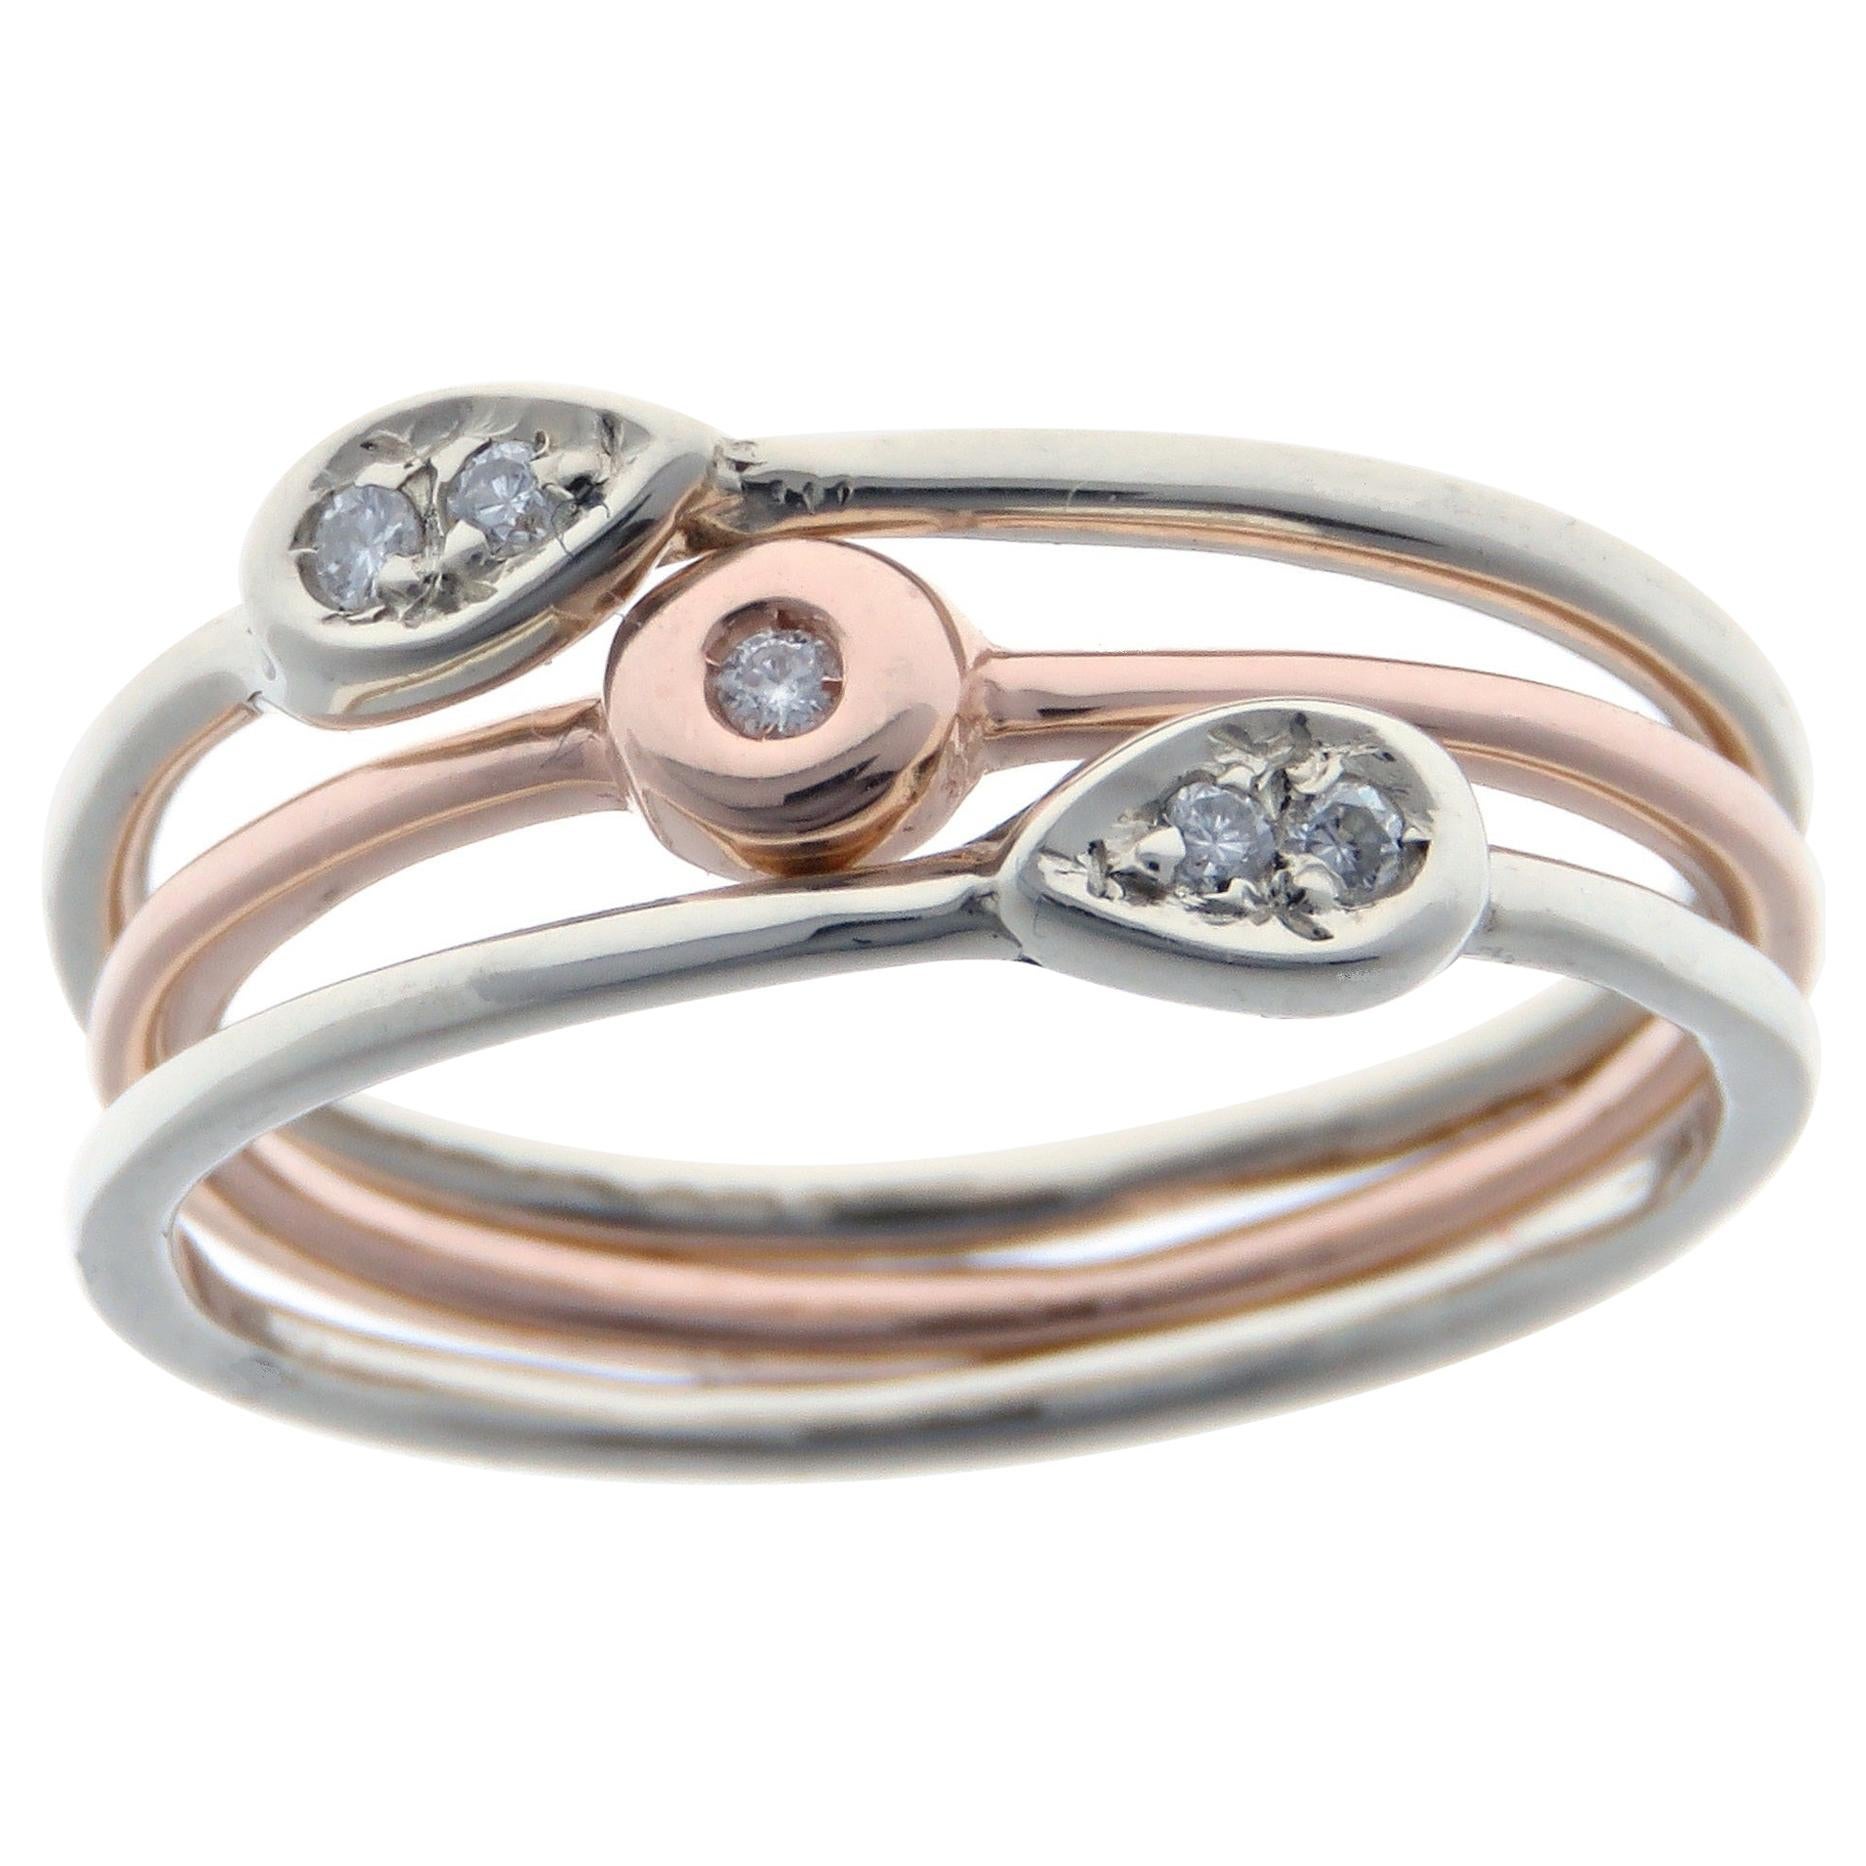 Diamonds White Rose Gold Stacking Ring Handcrafted in Italy by Botta Gioielli For Sale